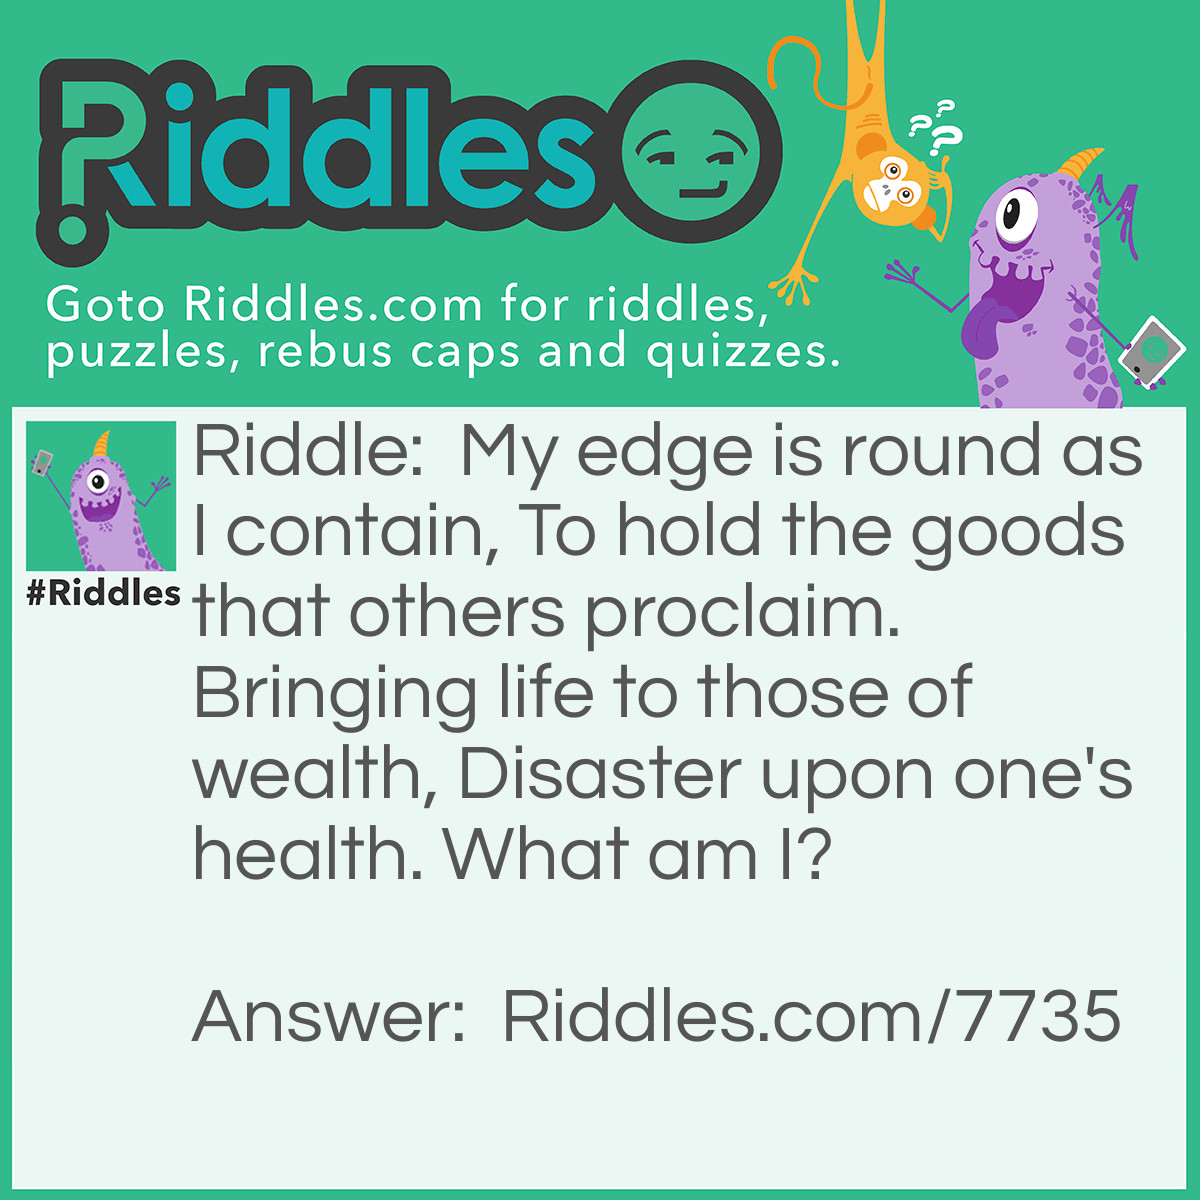 Riddle: My edge is round as I contain, To hold the goods that others proclaim. Bringing life to those of wealth, Disaster upon one's health. What am I? Answer: A cup